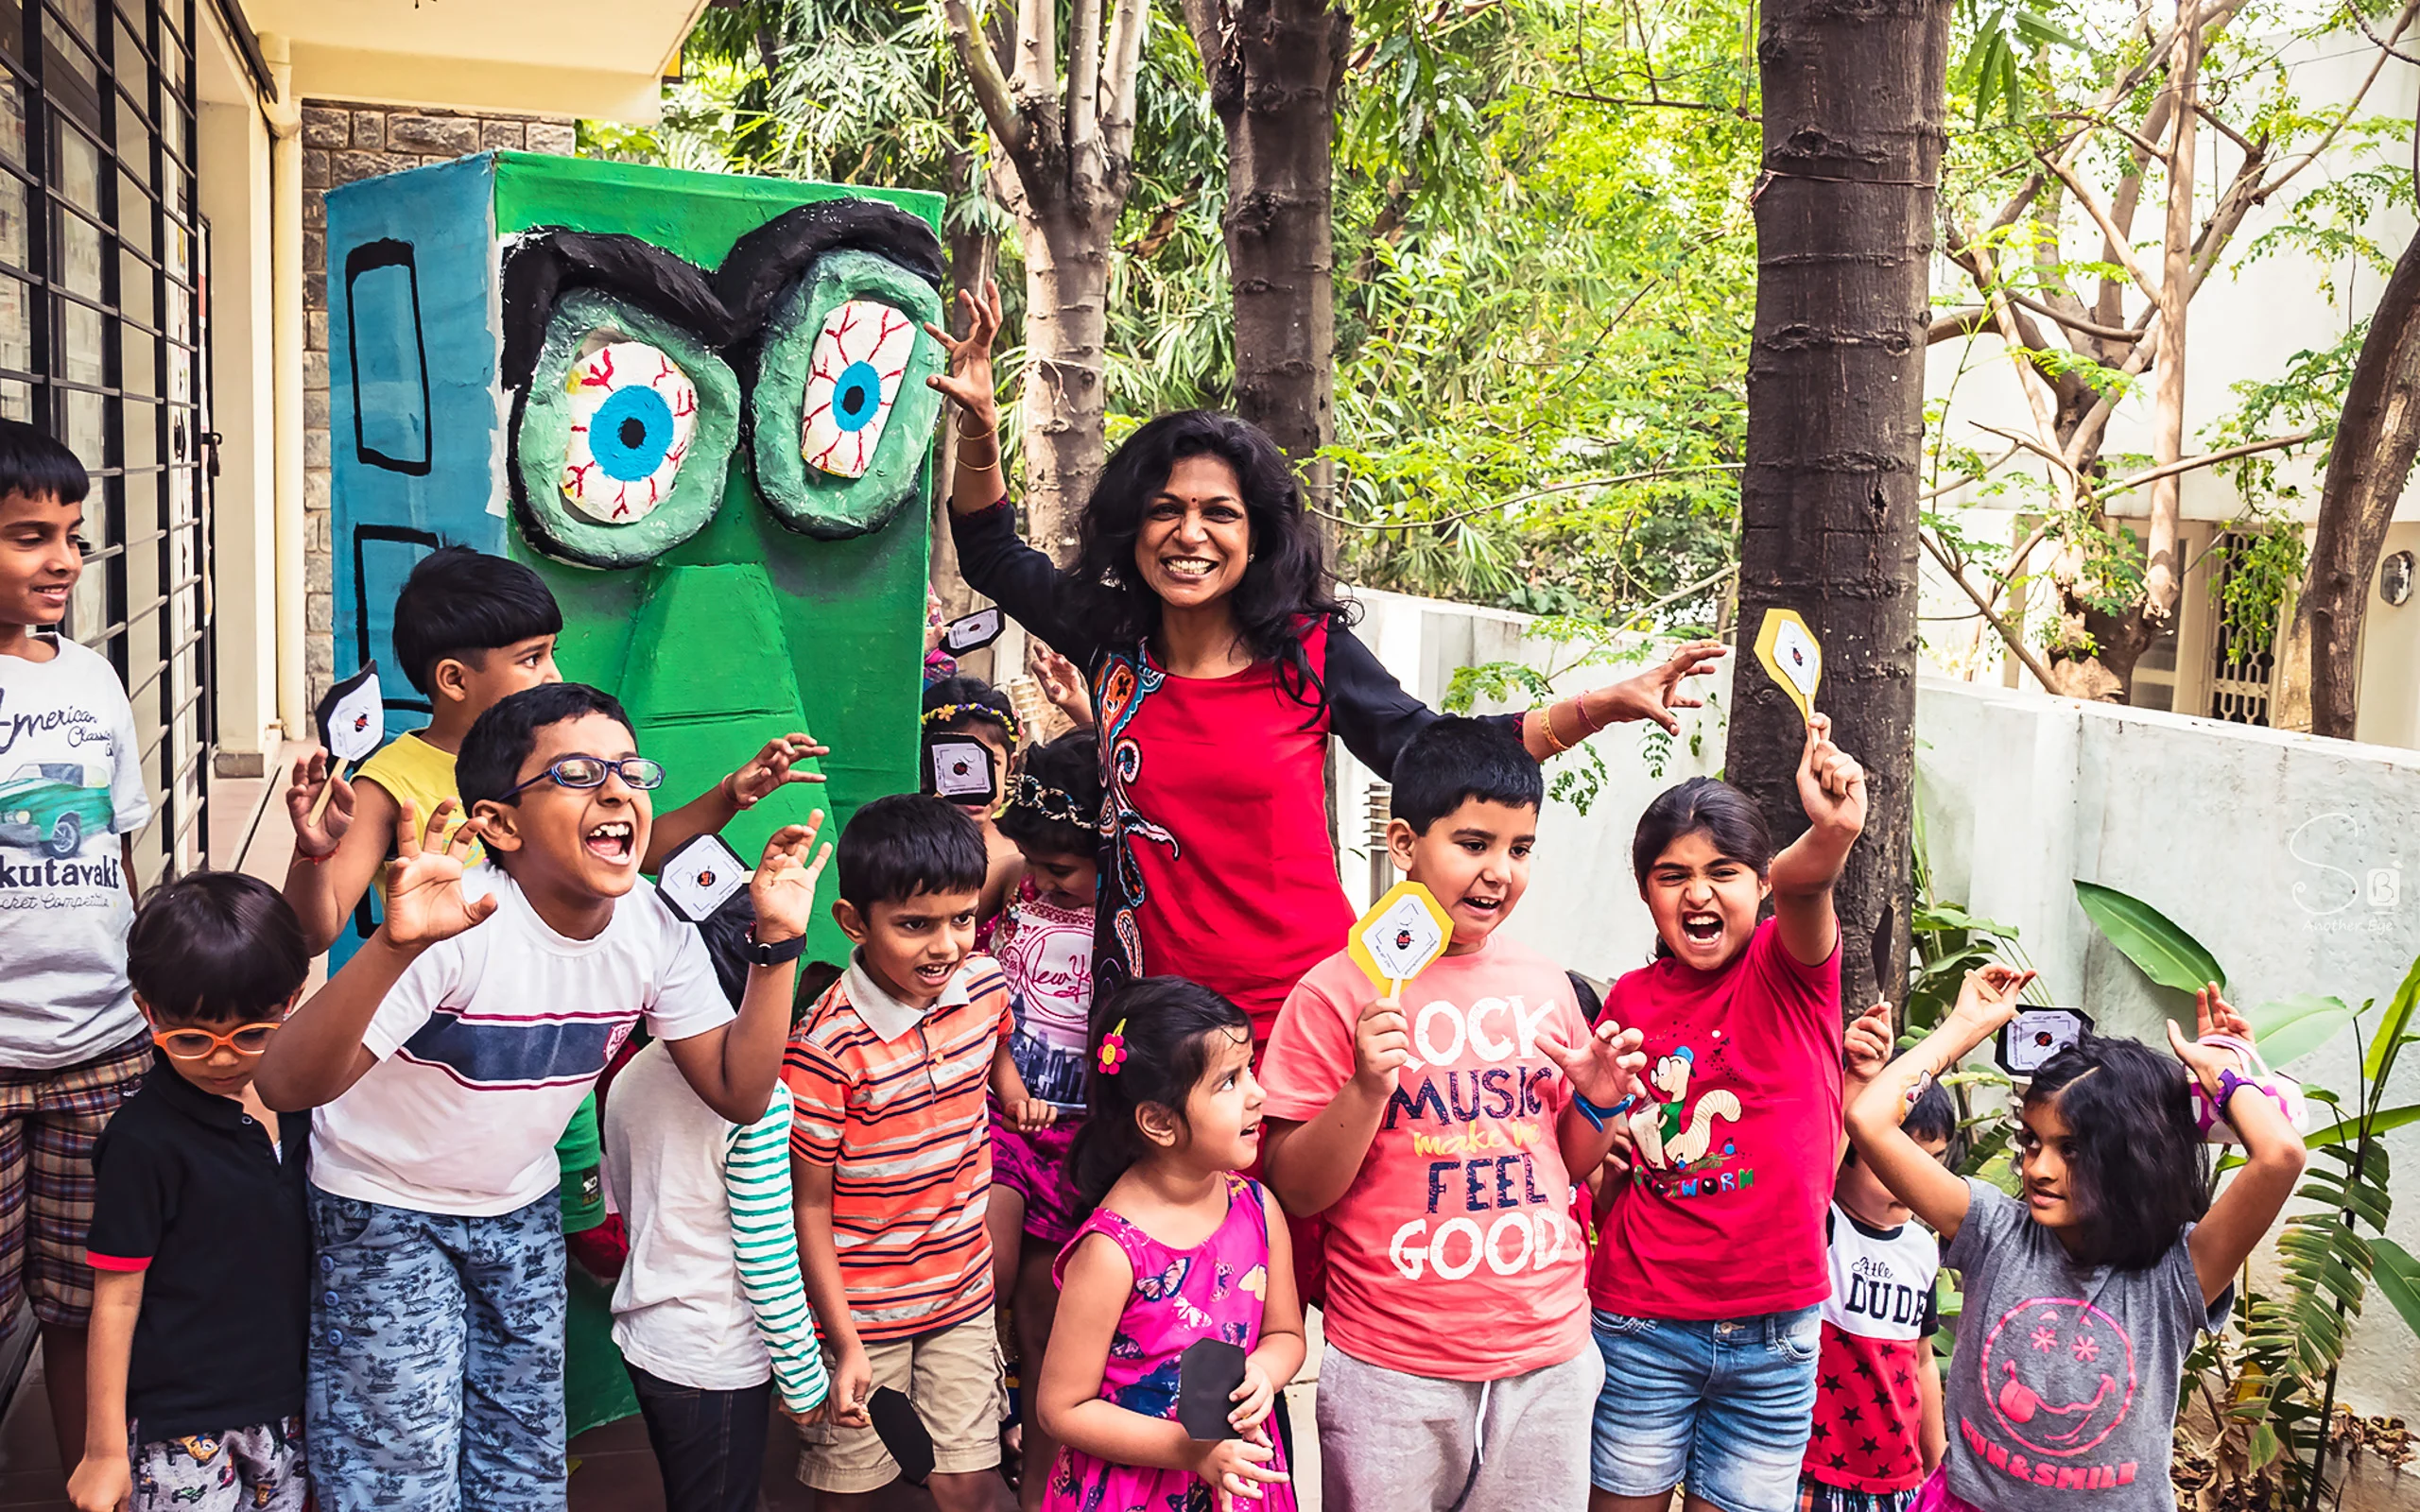 Aparna Athreya, storyteller and life skills coach, standing with a group of children from her educational company Kid and Parent Foundation